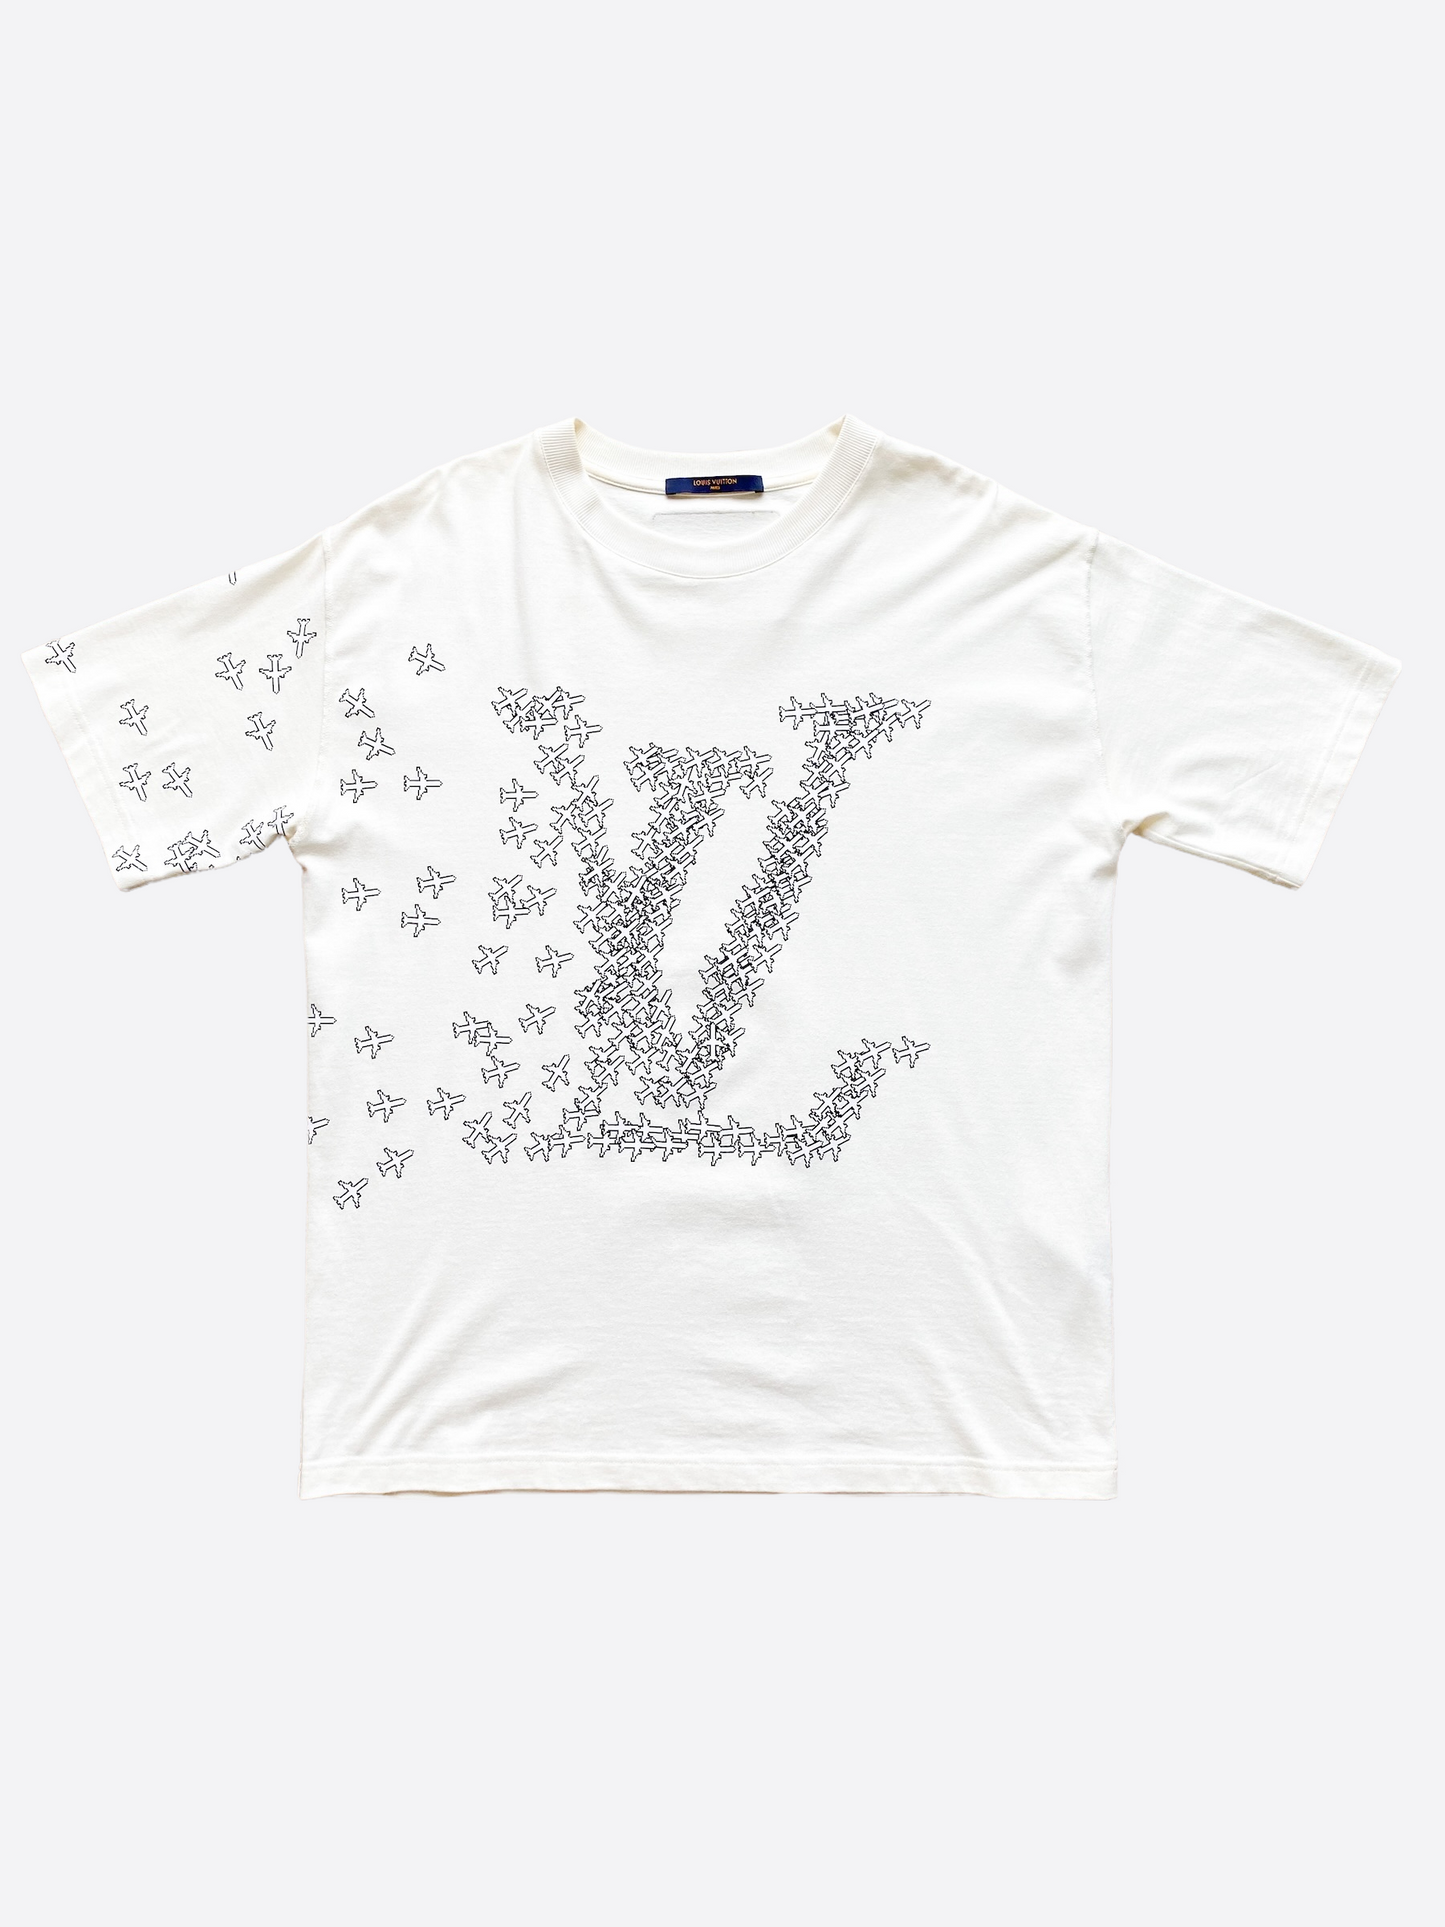 Compare prices for LV Planes Printed T-Shirt (1A7PZO) in official